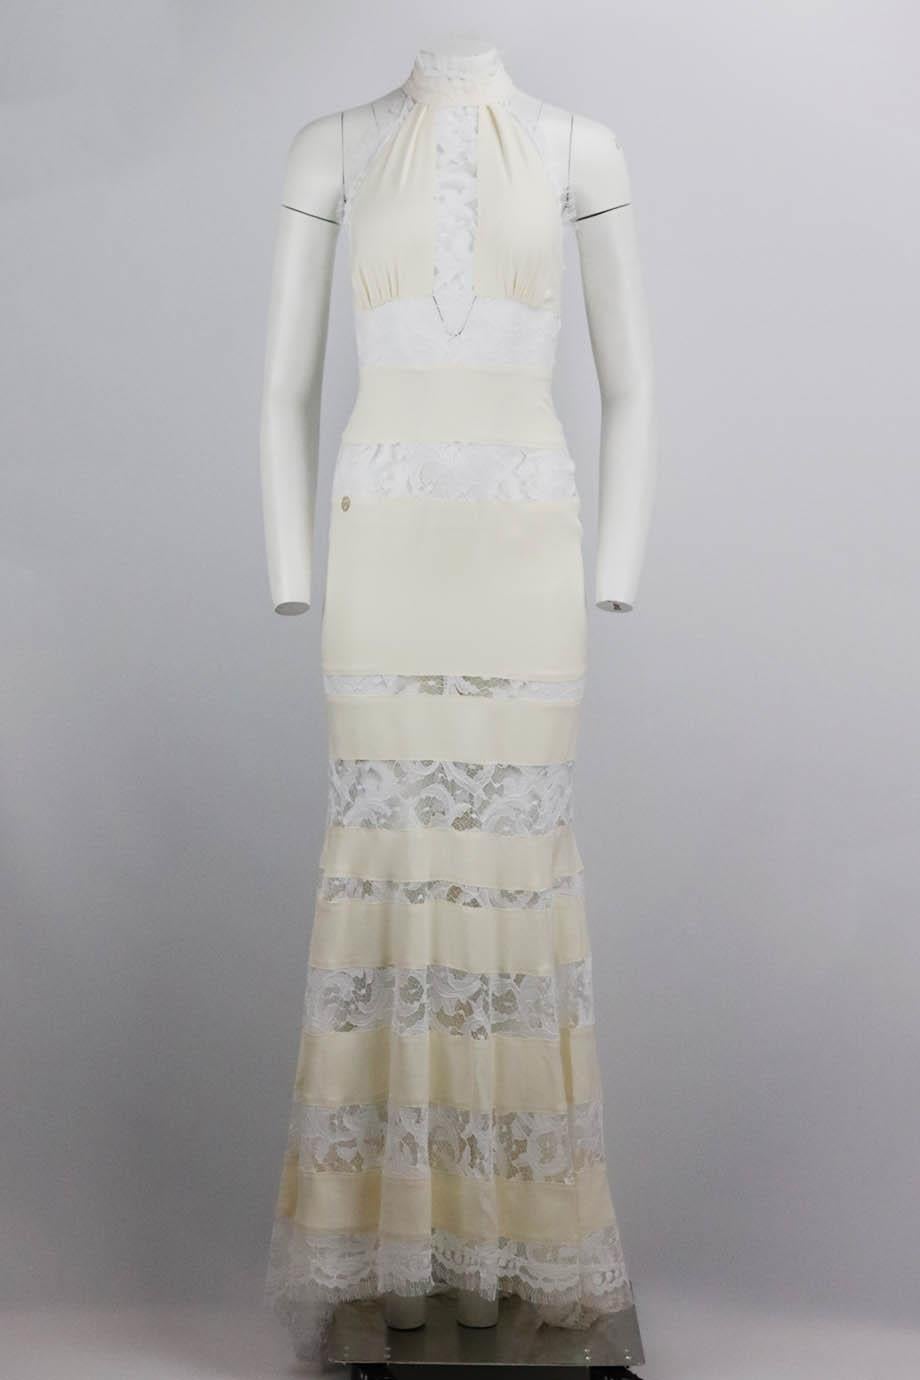 Philipp Plein tiered lace and crepe maxi dress. Ivory. Sleeveless, turtleneck. Zip fasteni50% Silk, 40% viscose, 10% polyester. Size: Small (UK 6, US 2, FR 34, IT 38). Bust: 28 in. Waist: 24 in. Hips: 35 in. Length: 61 in
